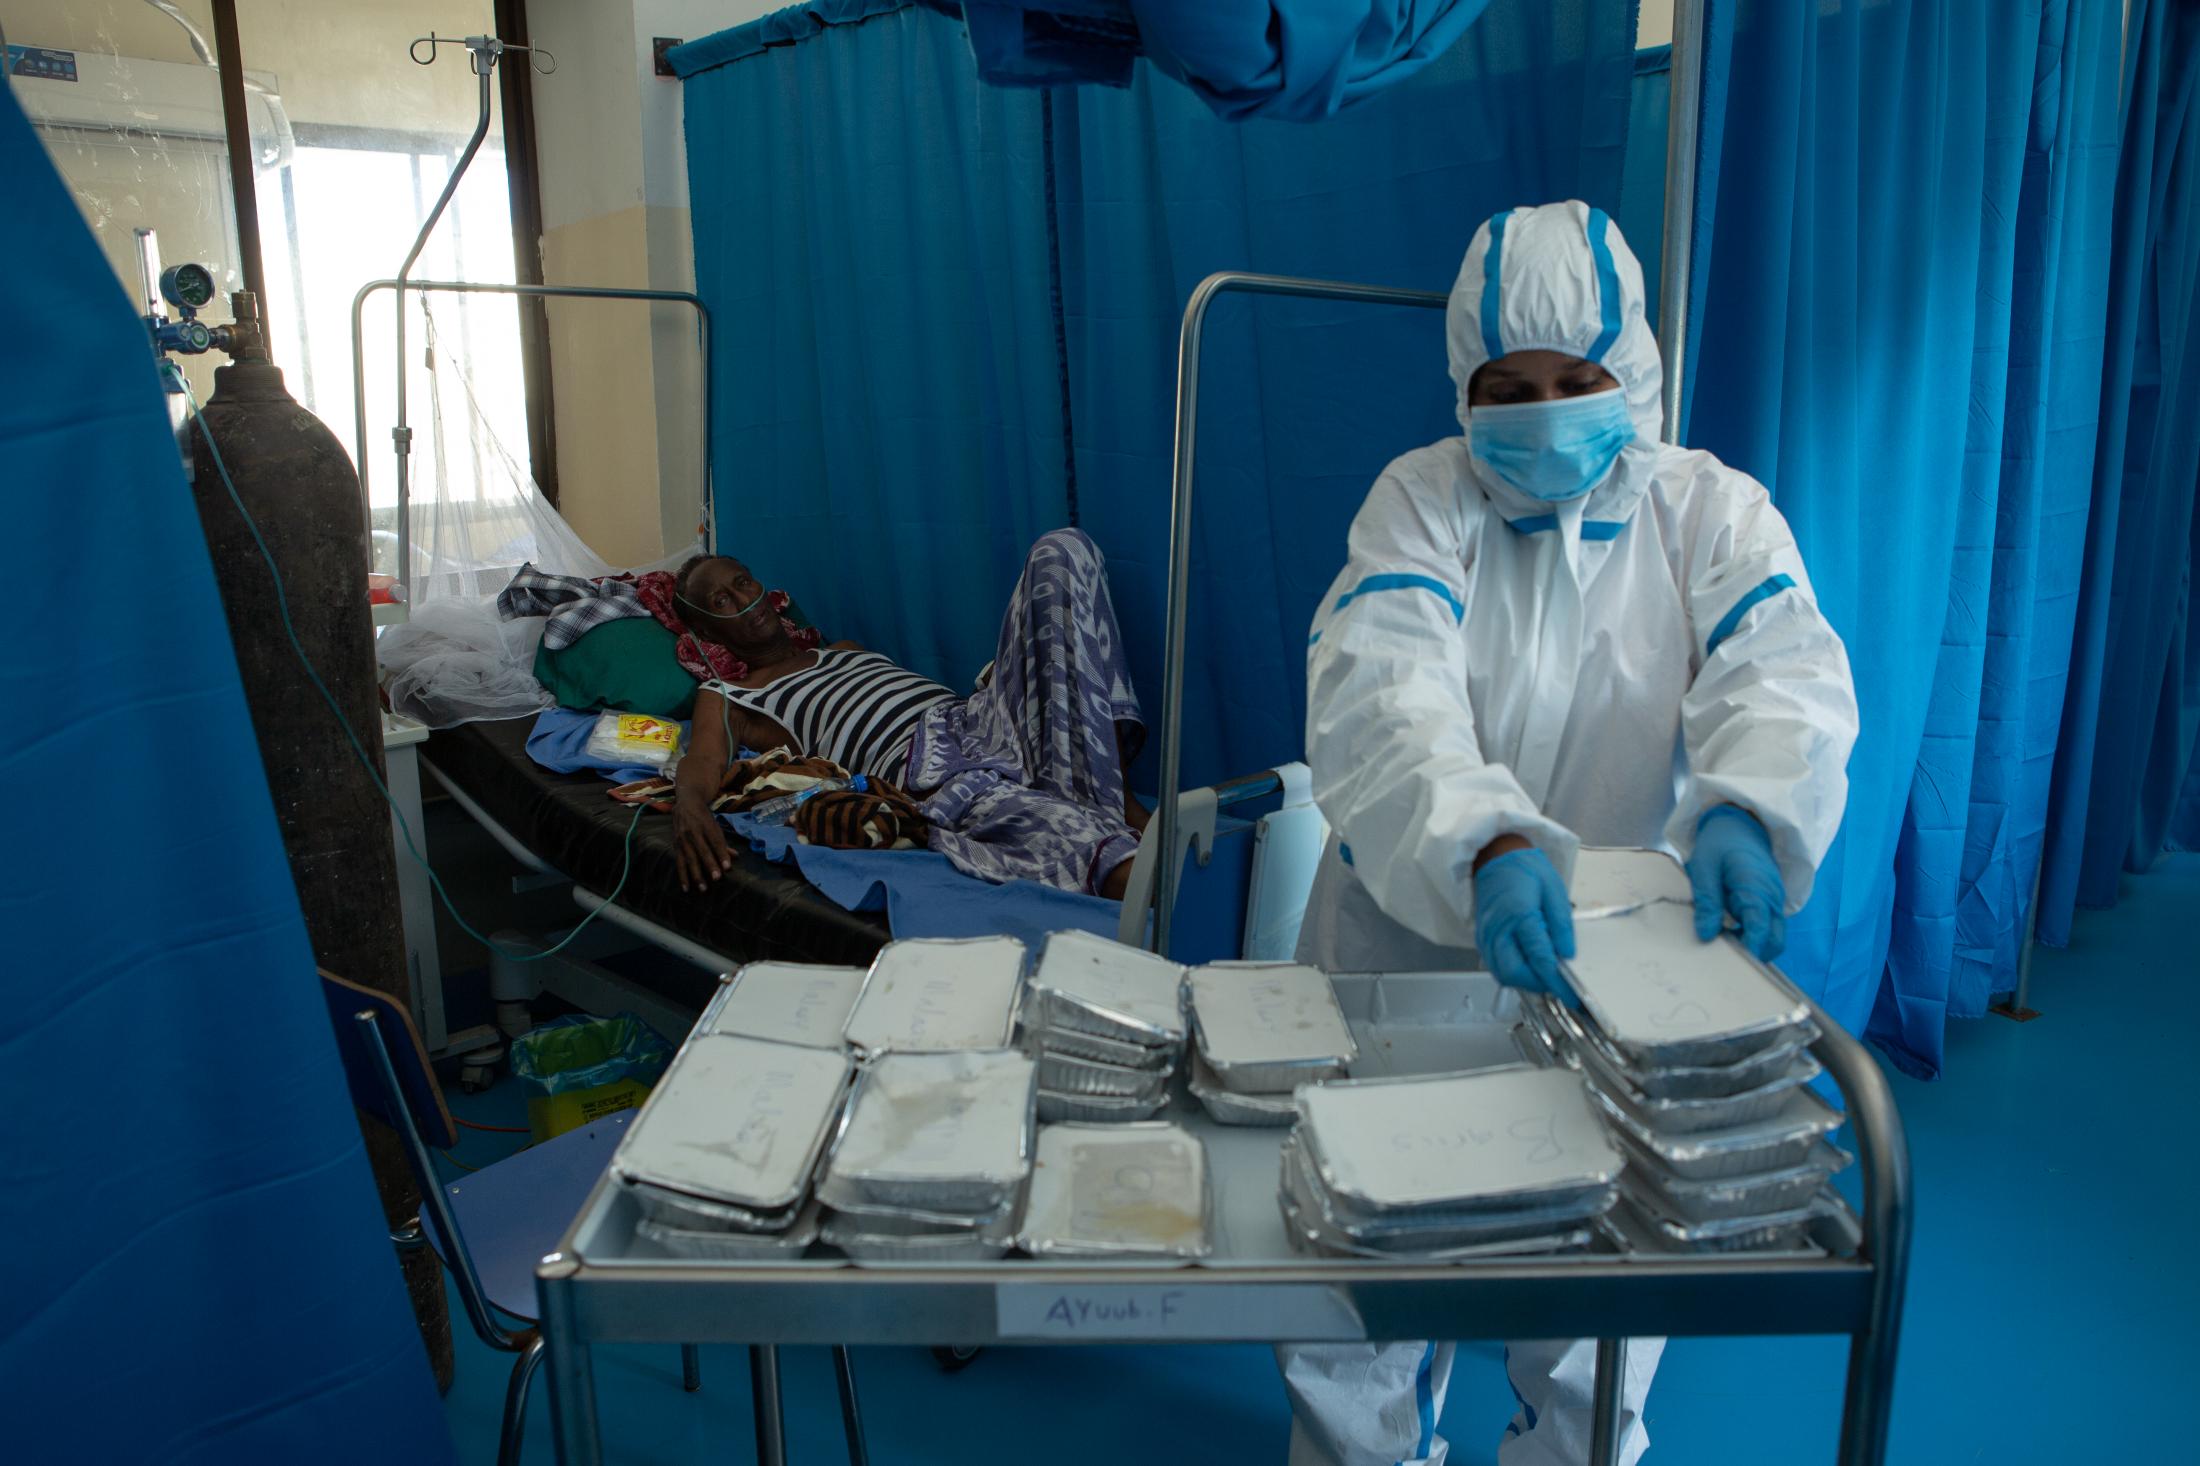 A day at a COVID -19 treatment centre in Somalia - A nurse serves lunch to a patient at the treatment ward...